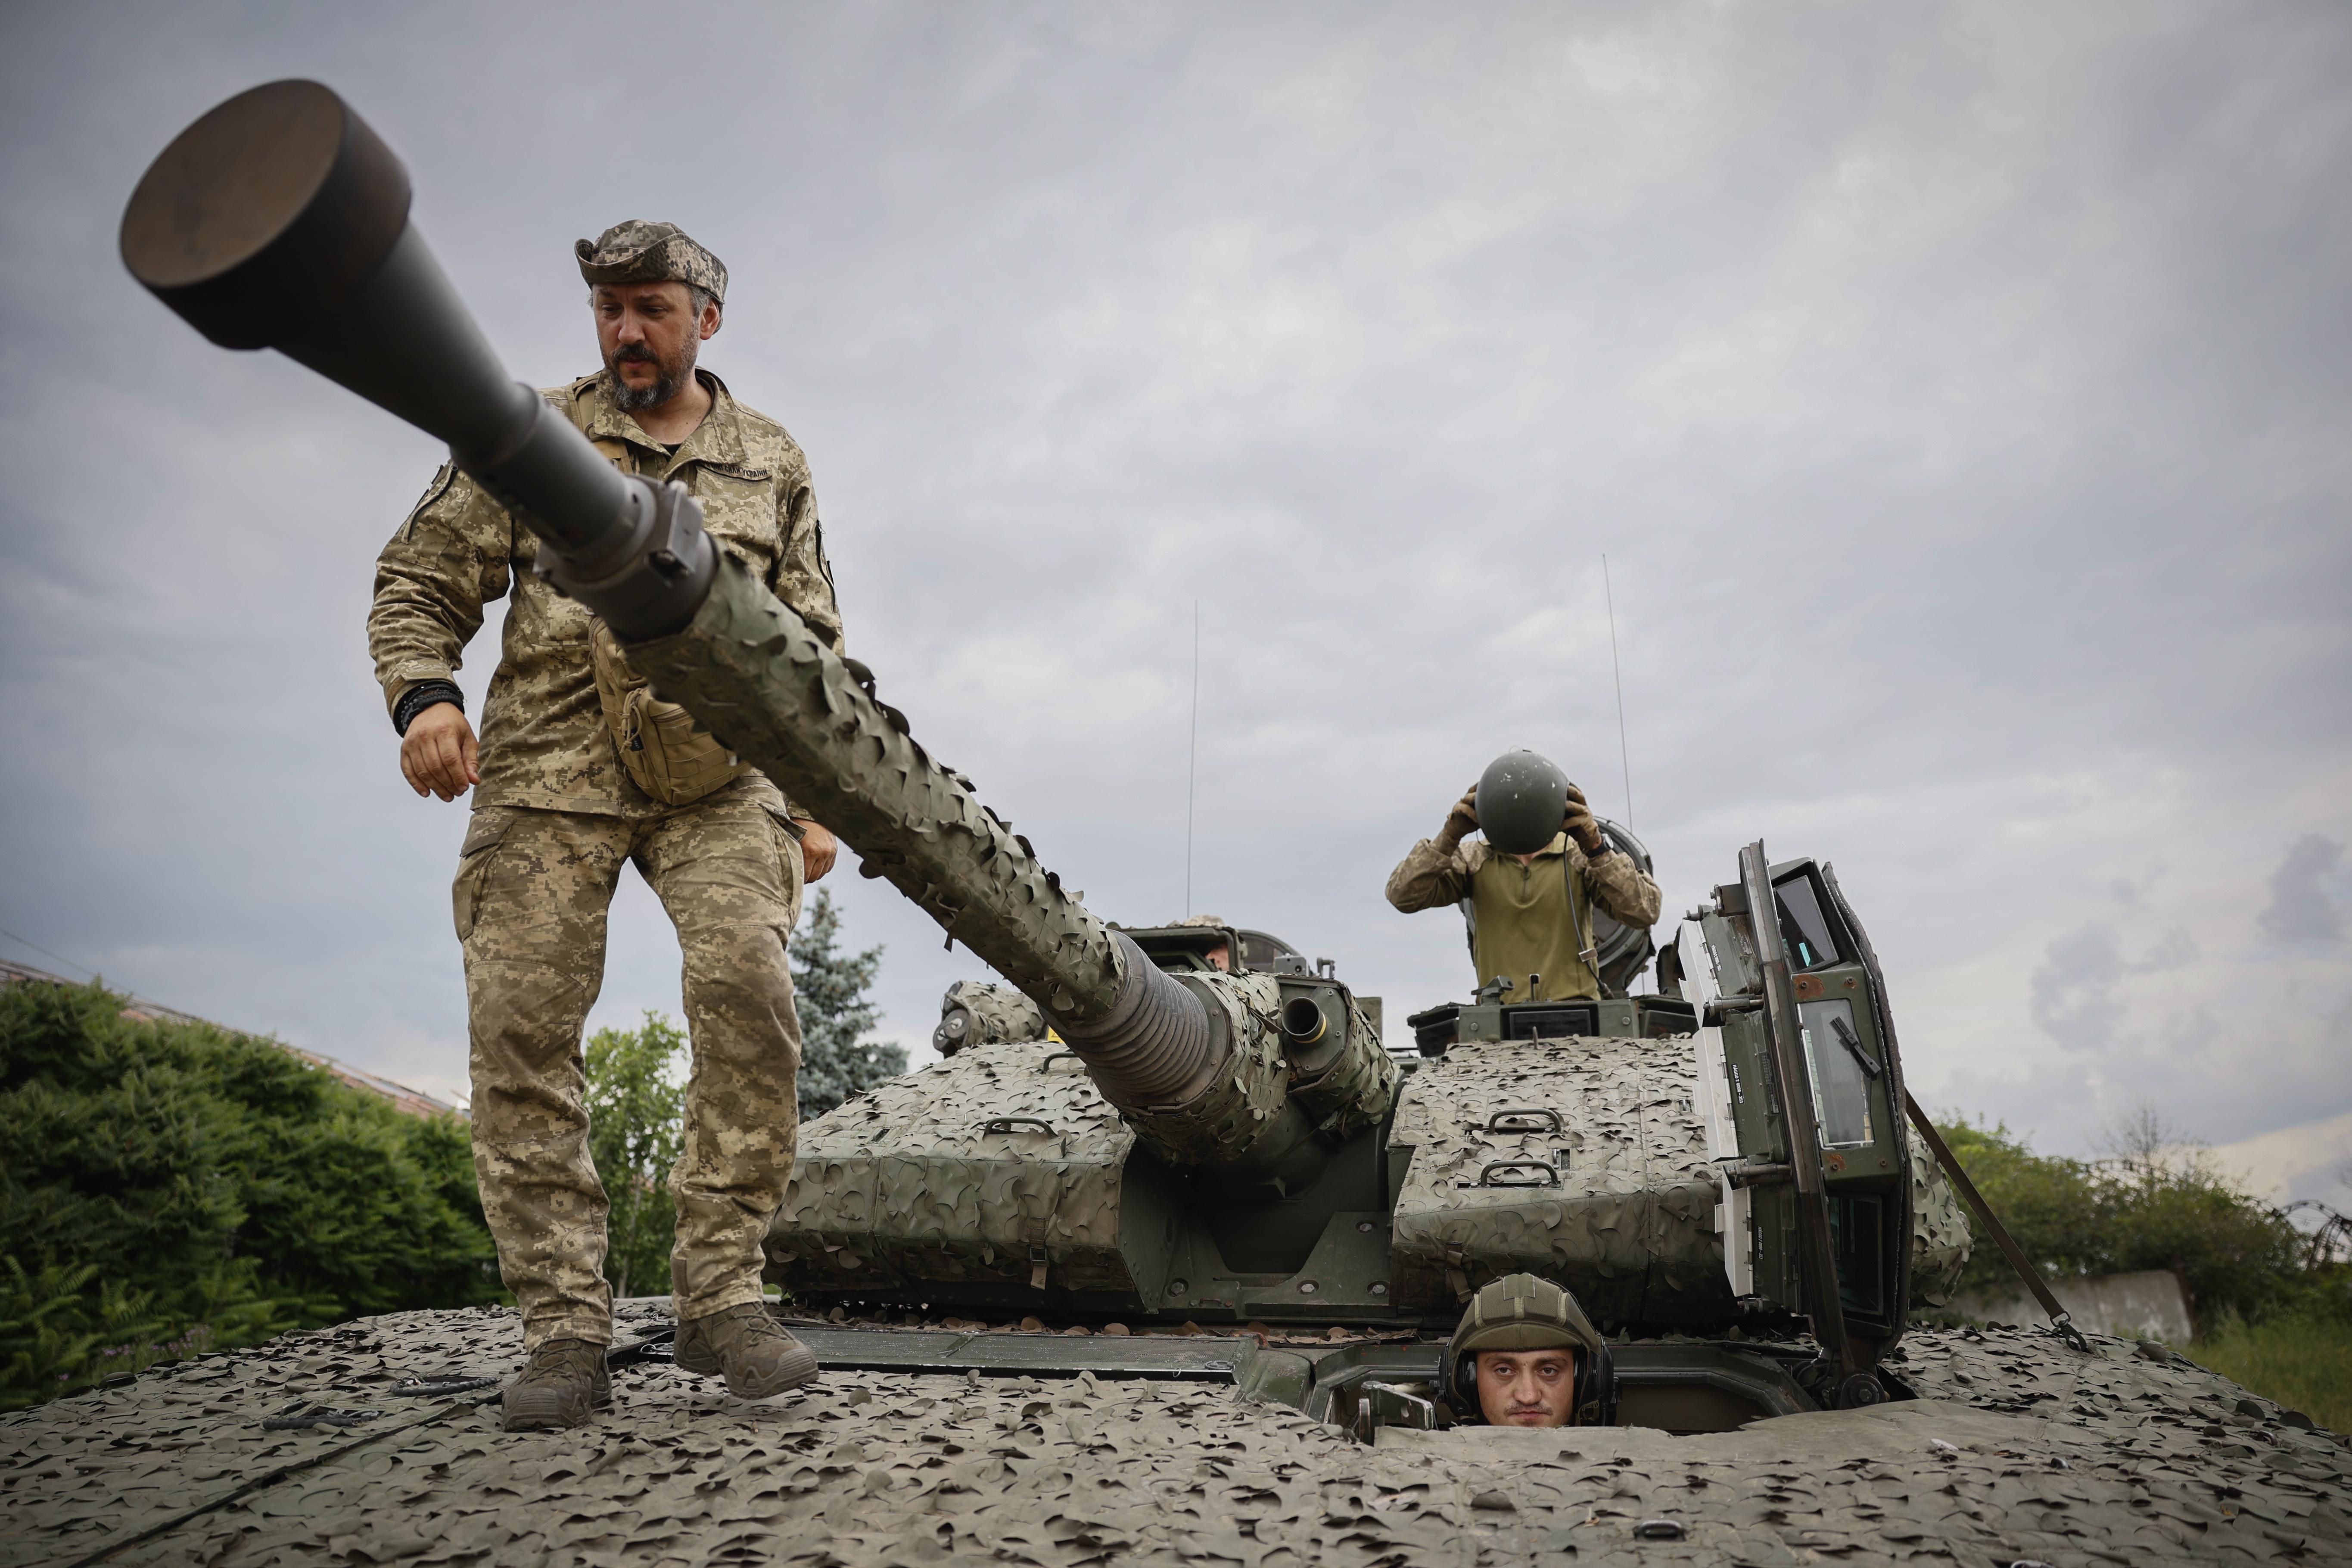 It hasn’t changed anything for us, say Ukraine’s soldiers